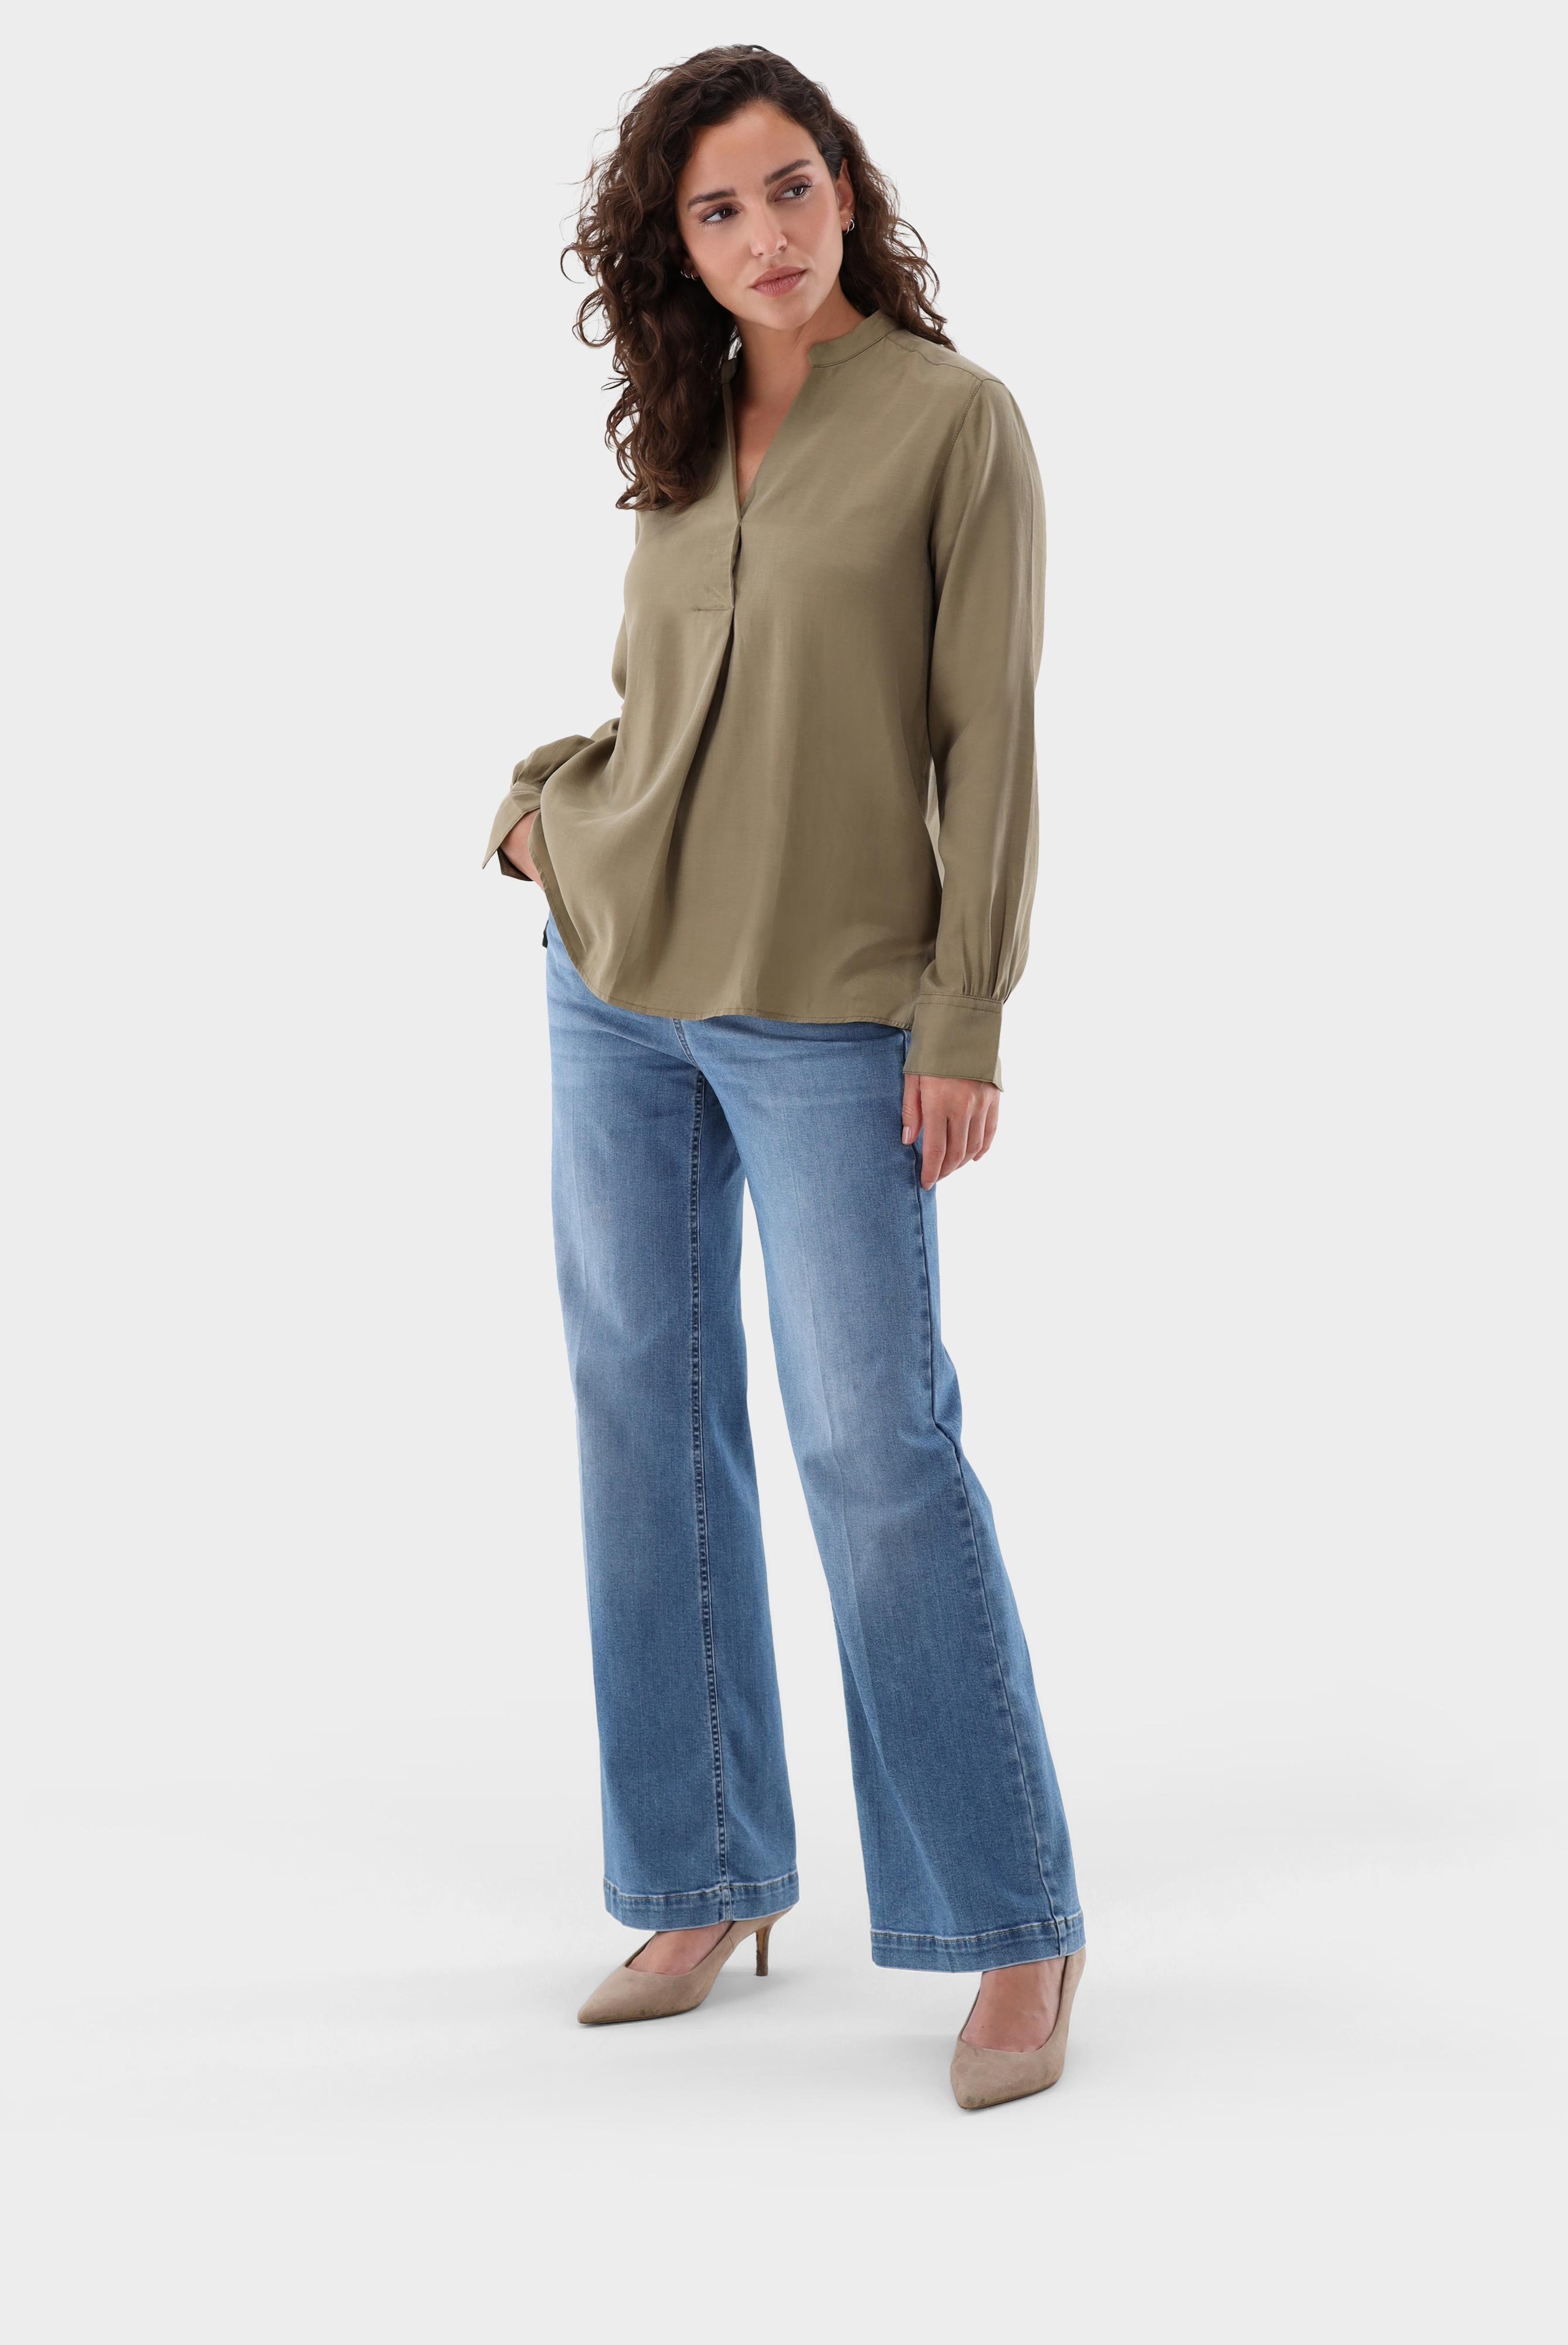 Casual Blouses+Stand-up Collar Shirt with lyocell and cotton+05.527Y.49.150258.960.32